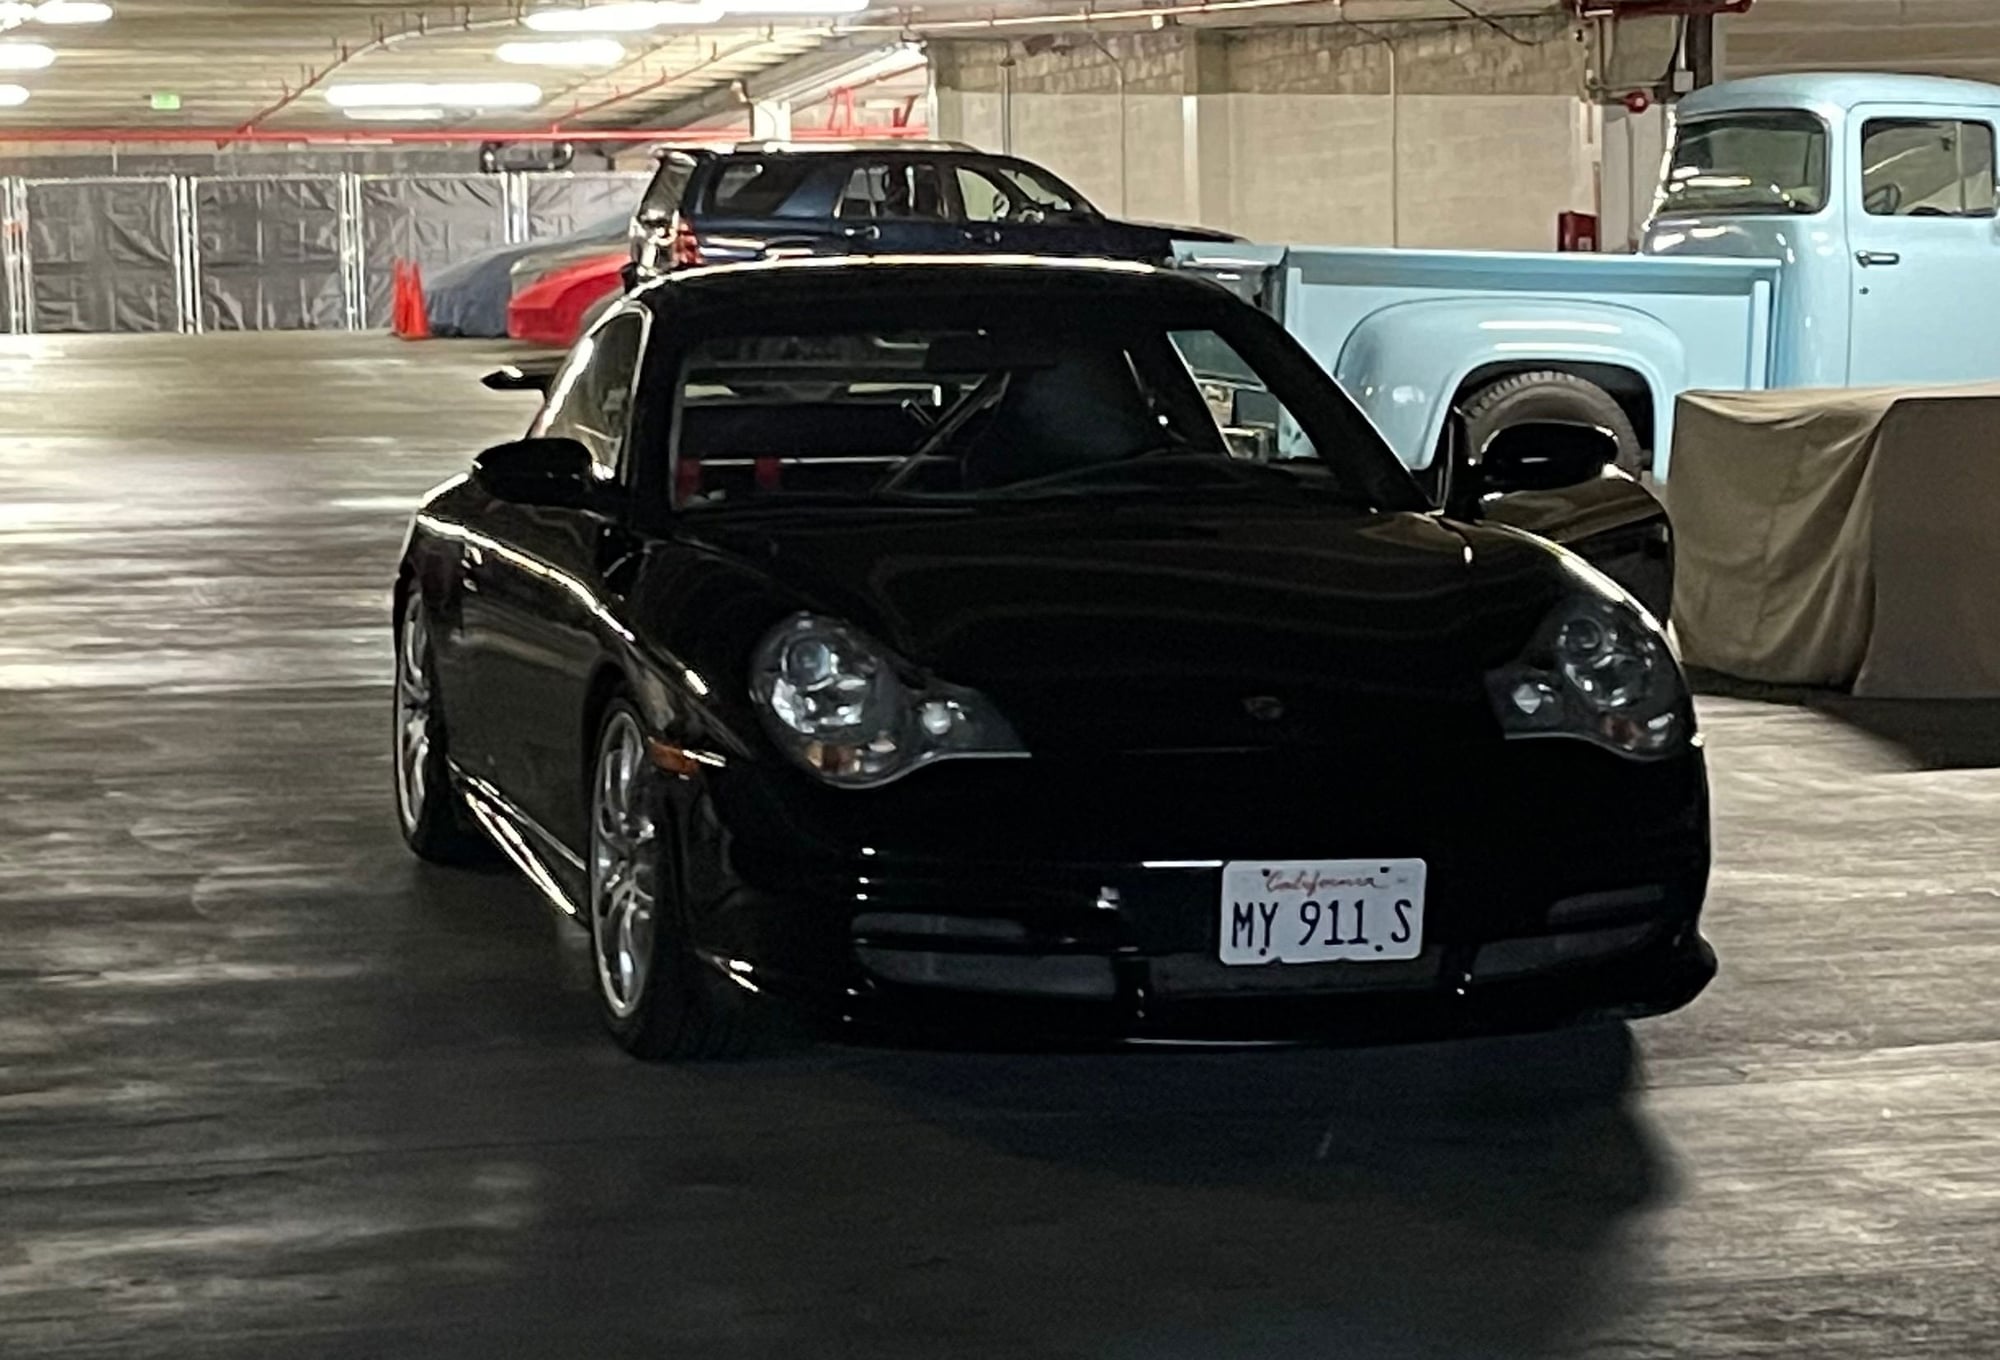 2004 Porsche GT3 - 2004 GT3 - Used - VIN WP0AC29984S692446 - 46,000 Miles - 6 cyl - 2WD - Manual - Coupe - Black - Long Beach, CA 90808, United States